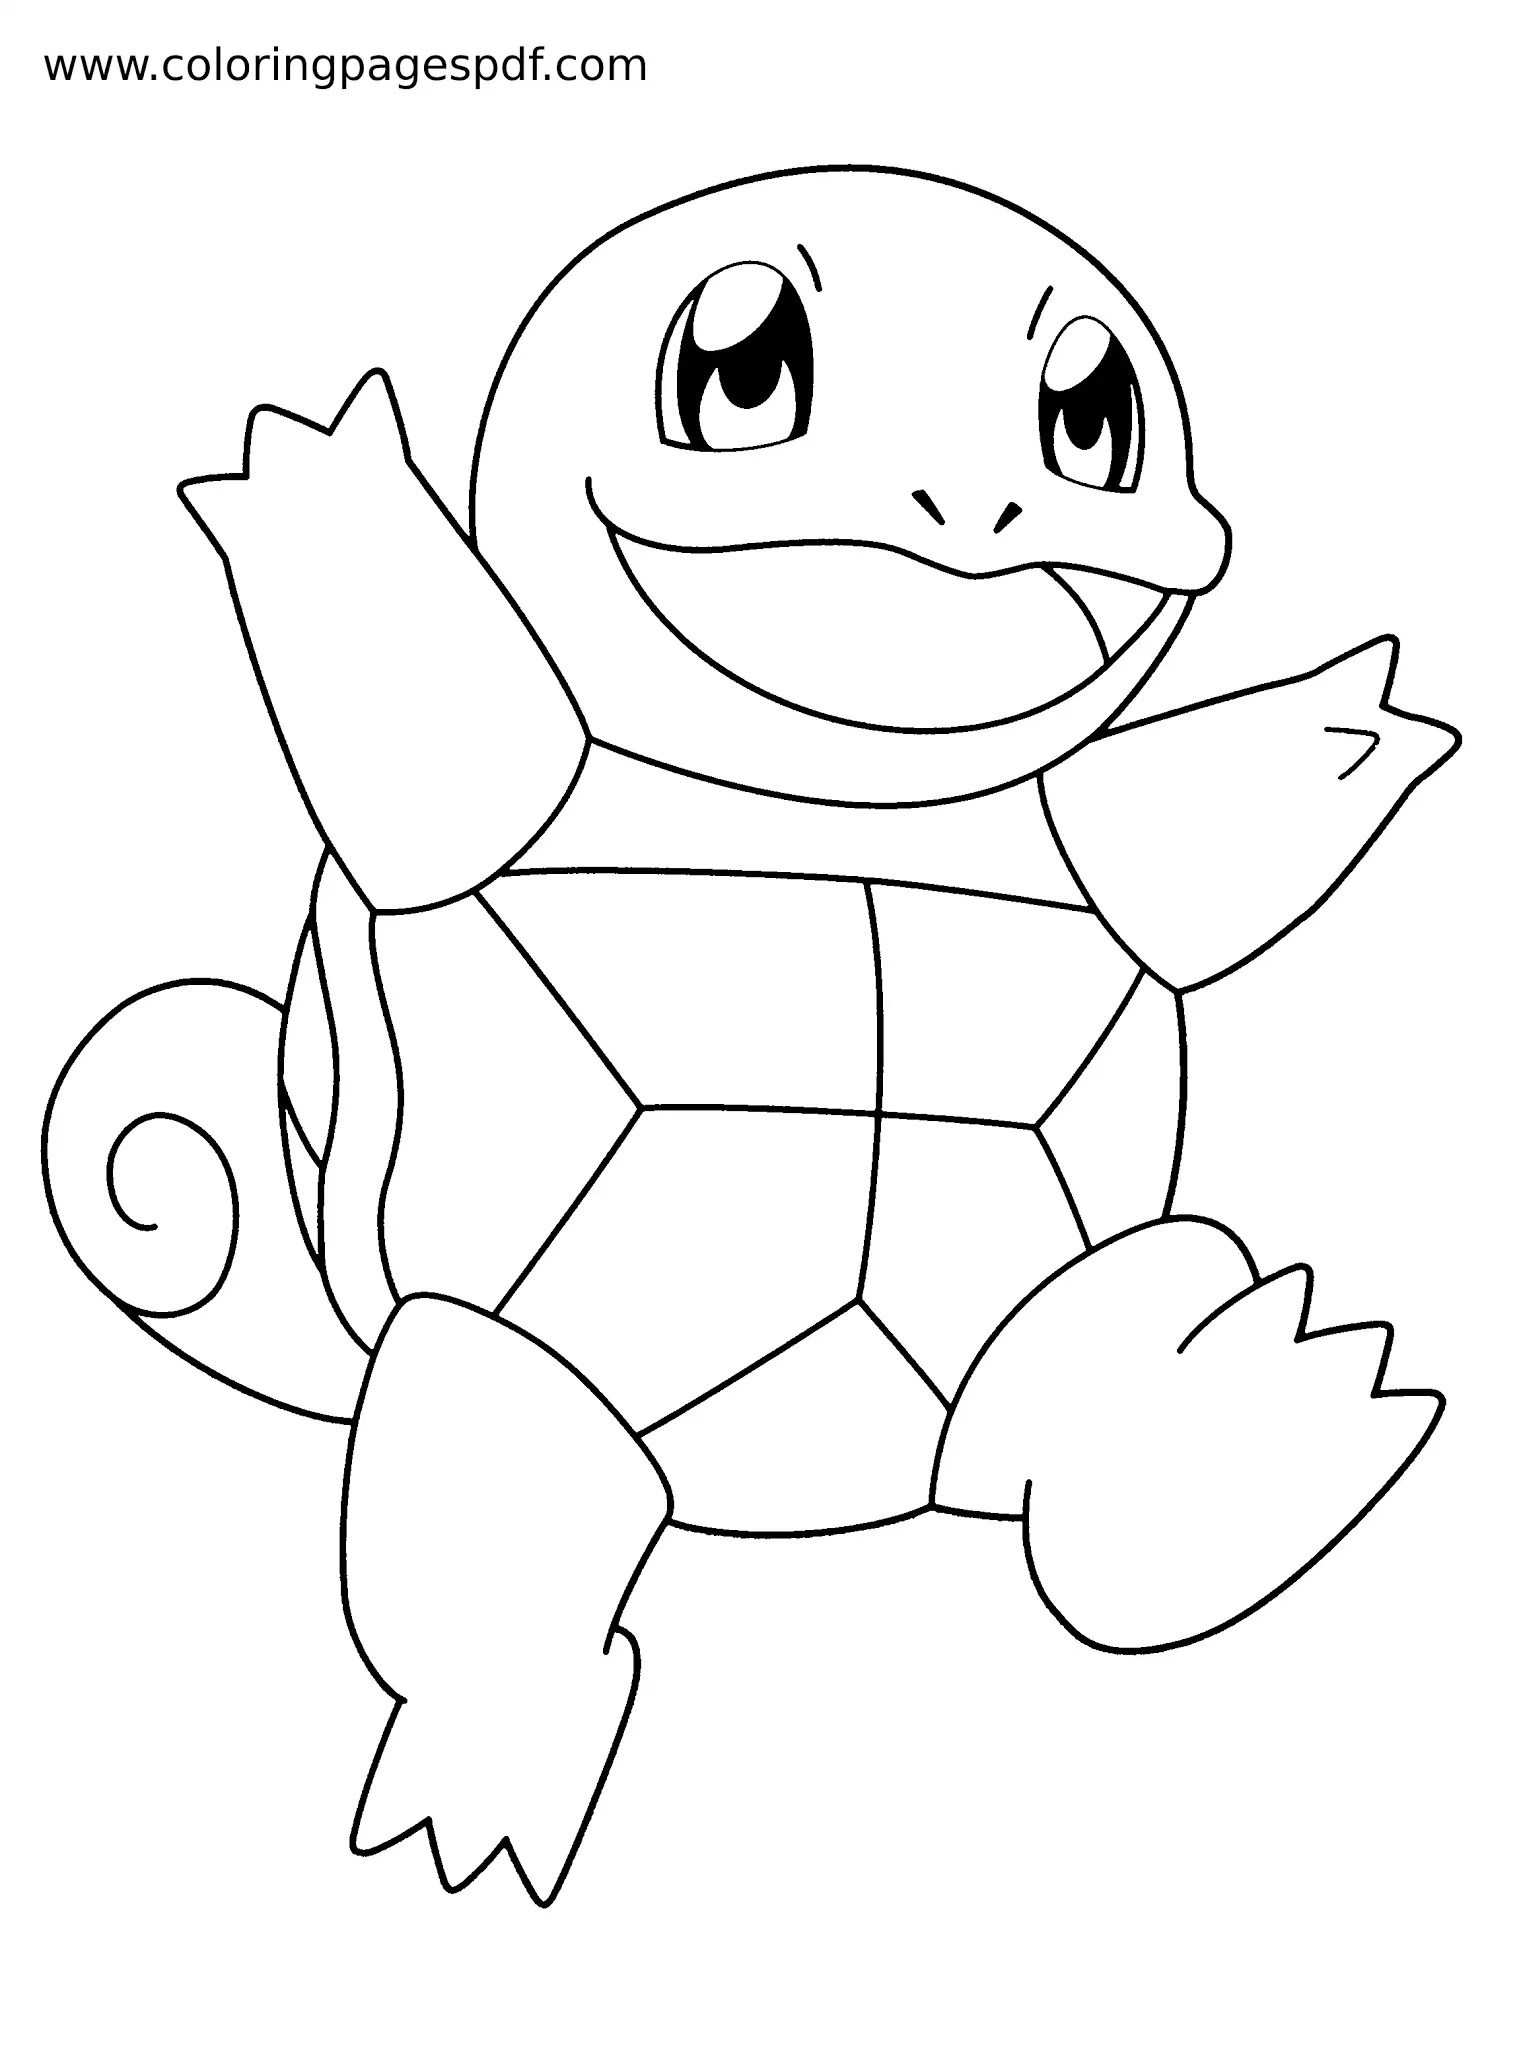 Coloring Page Of Bulbasaur